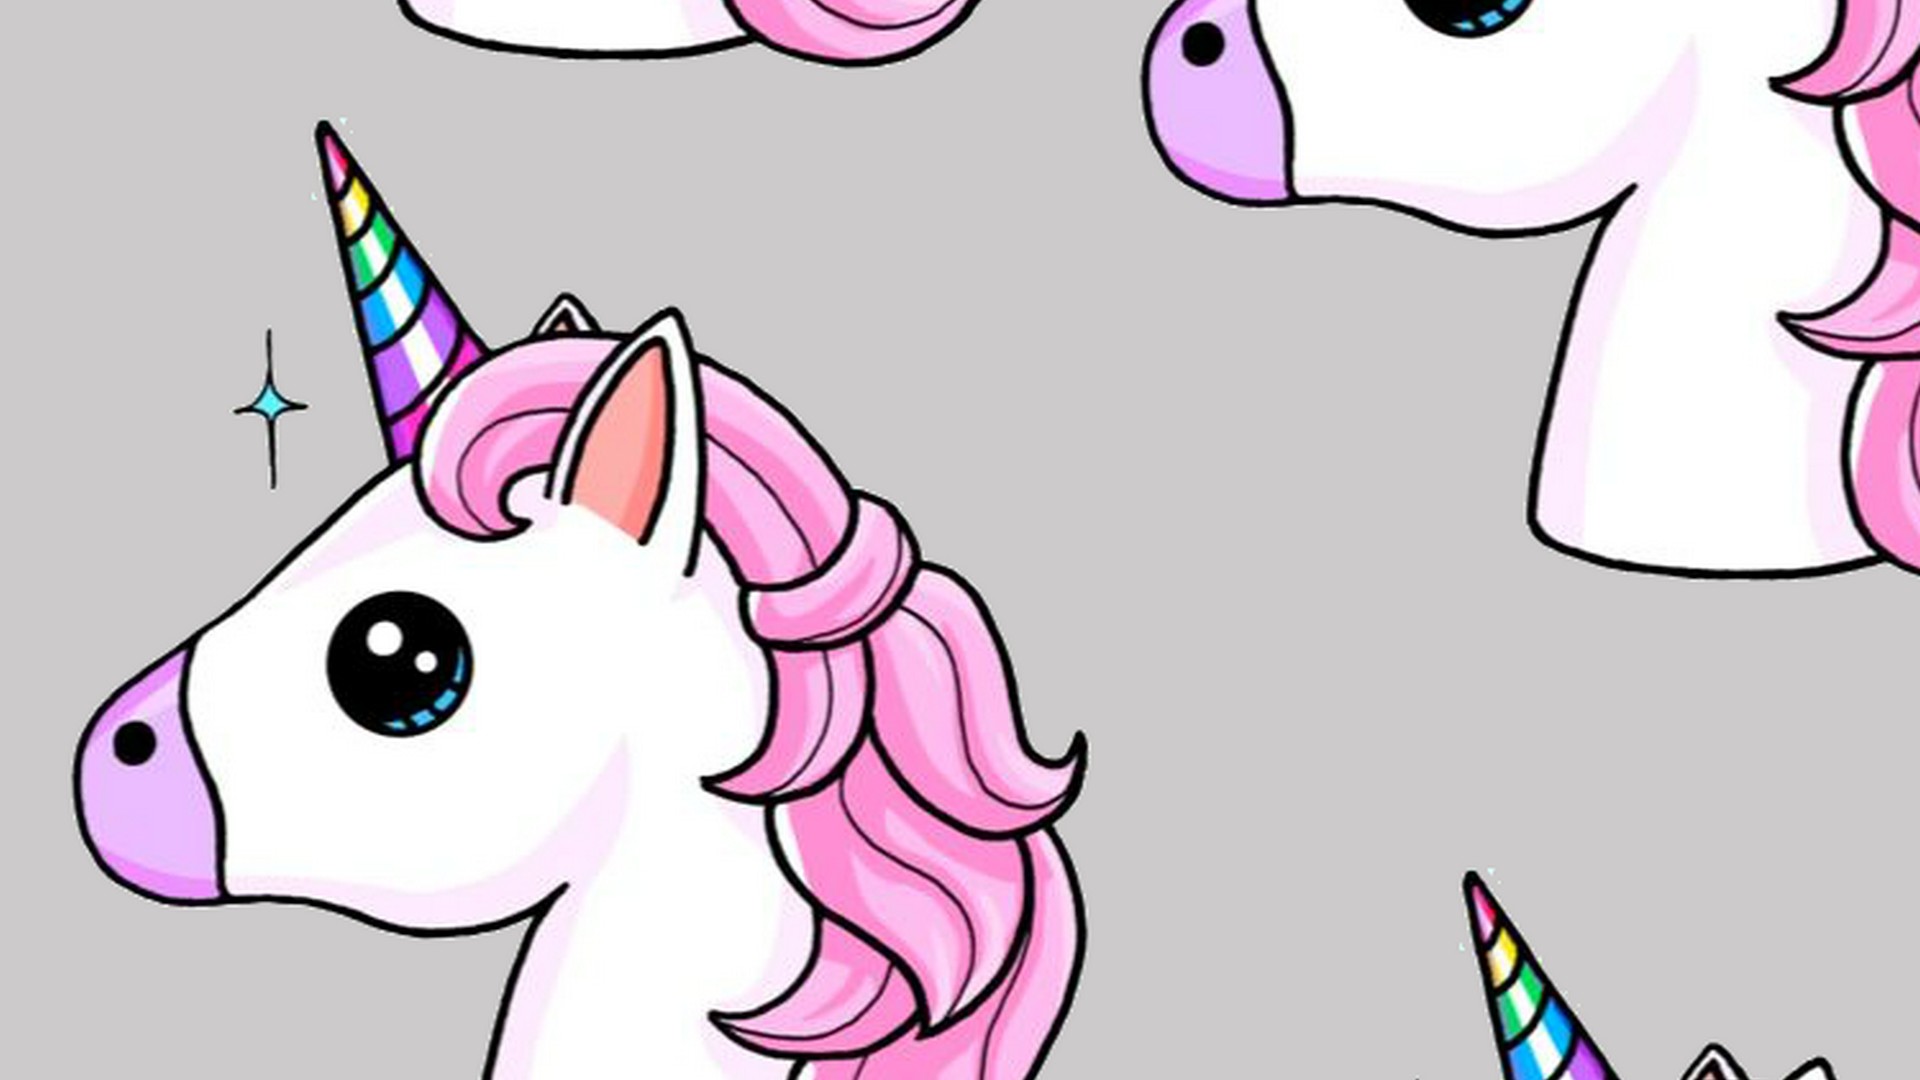 HD Wallpaper Cute Girly Unicorn With high-resolution 1920X1080 pixel. You can use this wallpaper for your Desktop Computer Backgrounds, Mac Wallpapers, Android Lock screen or iPhone Screensavers and another smartphone device